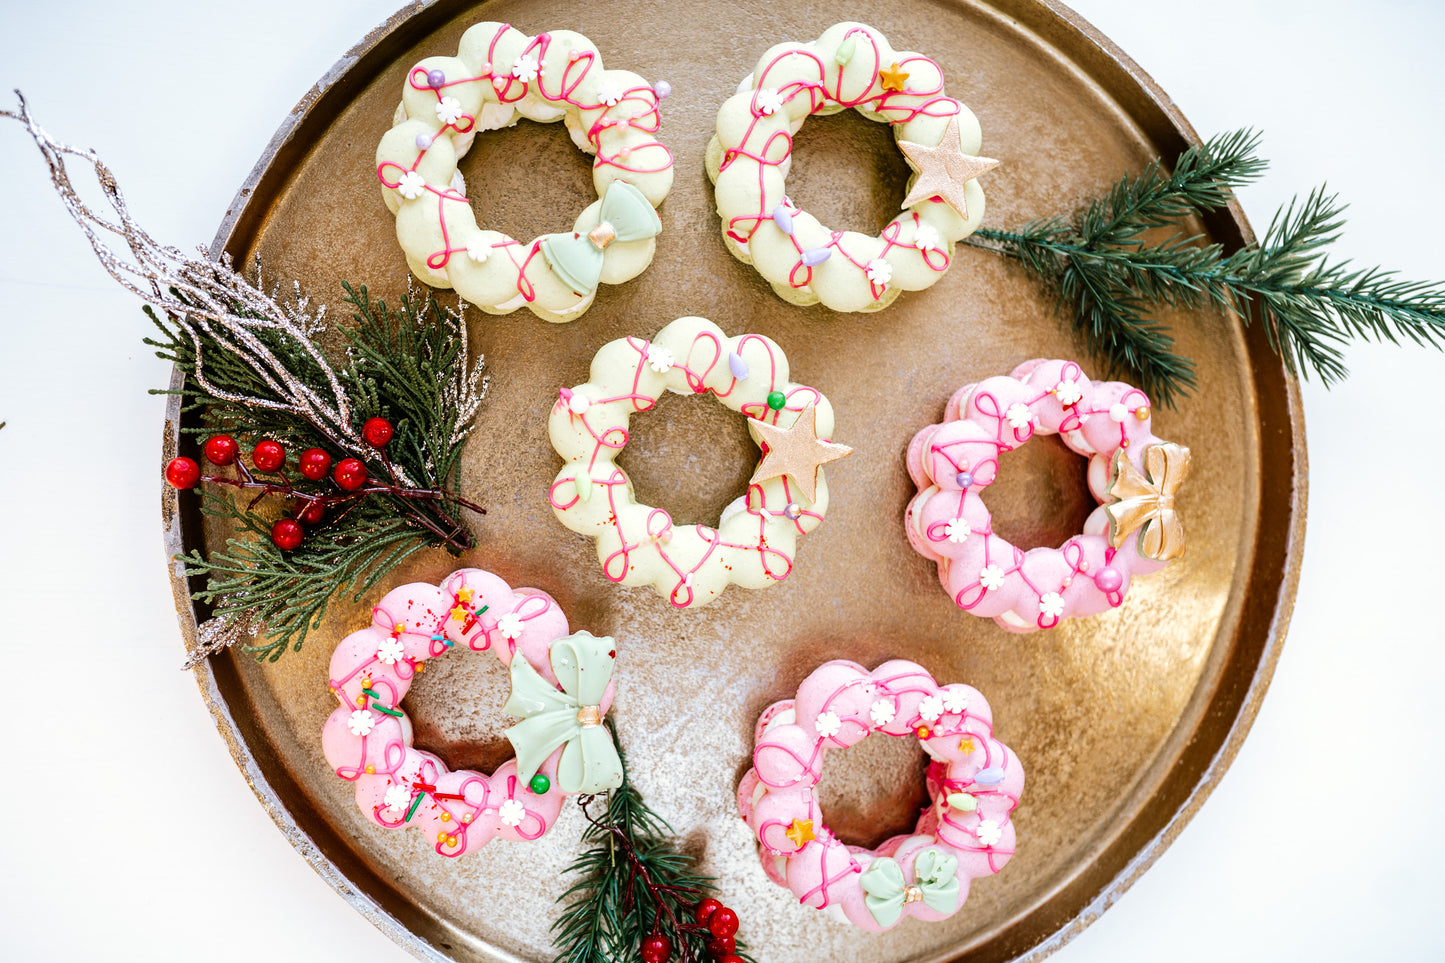 Macaron wreath filled with a French buttercream and raspberry compote.(12)